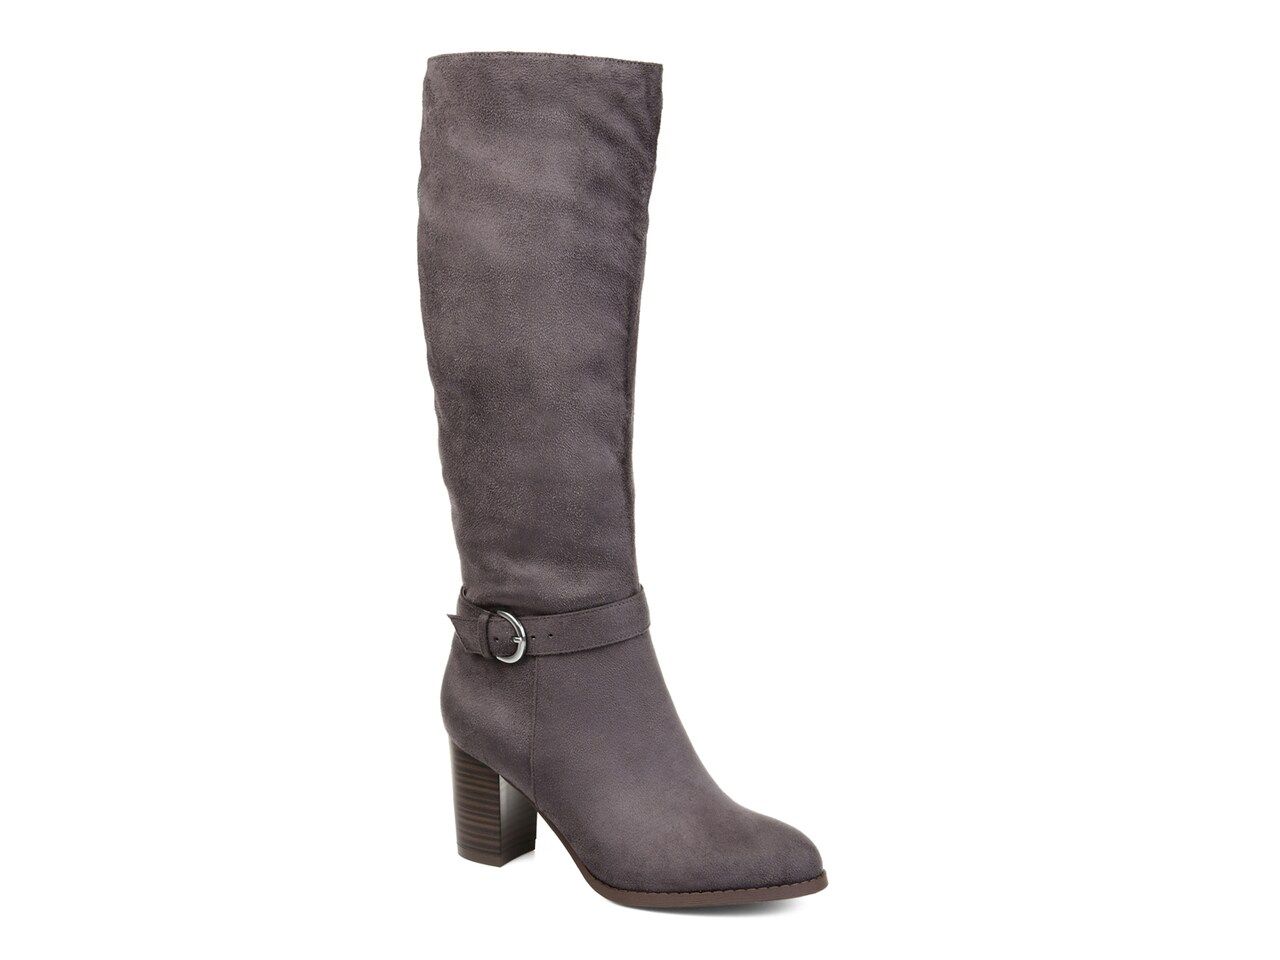 Joelle Extra Wide Calf Riding Boot | DSW